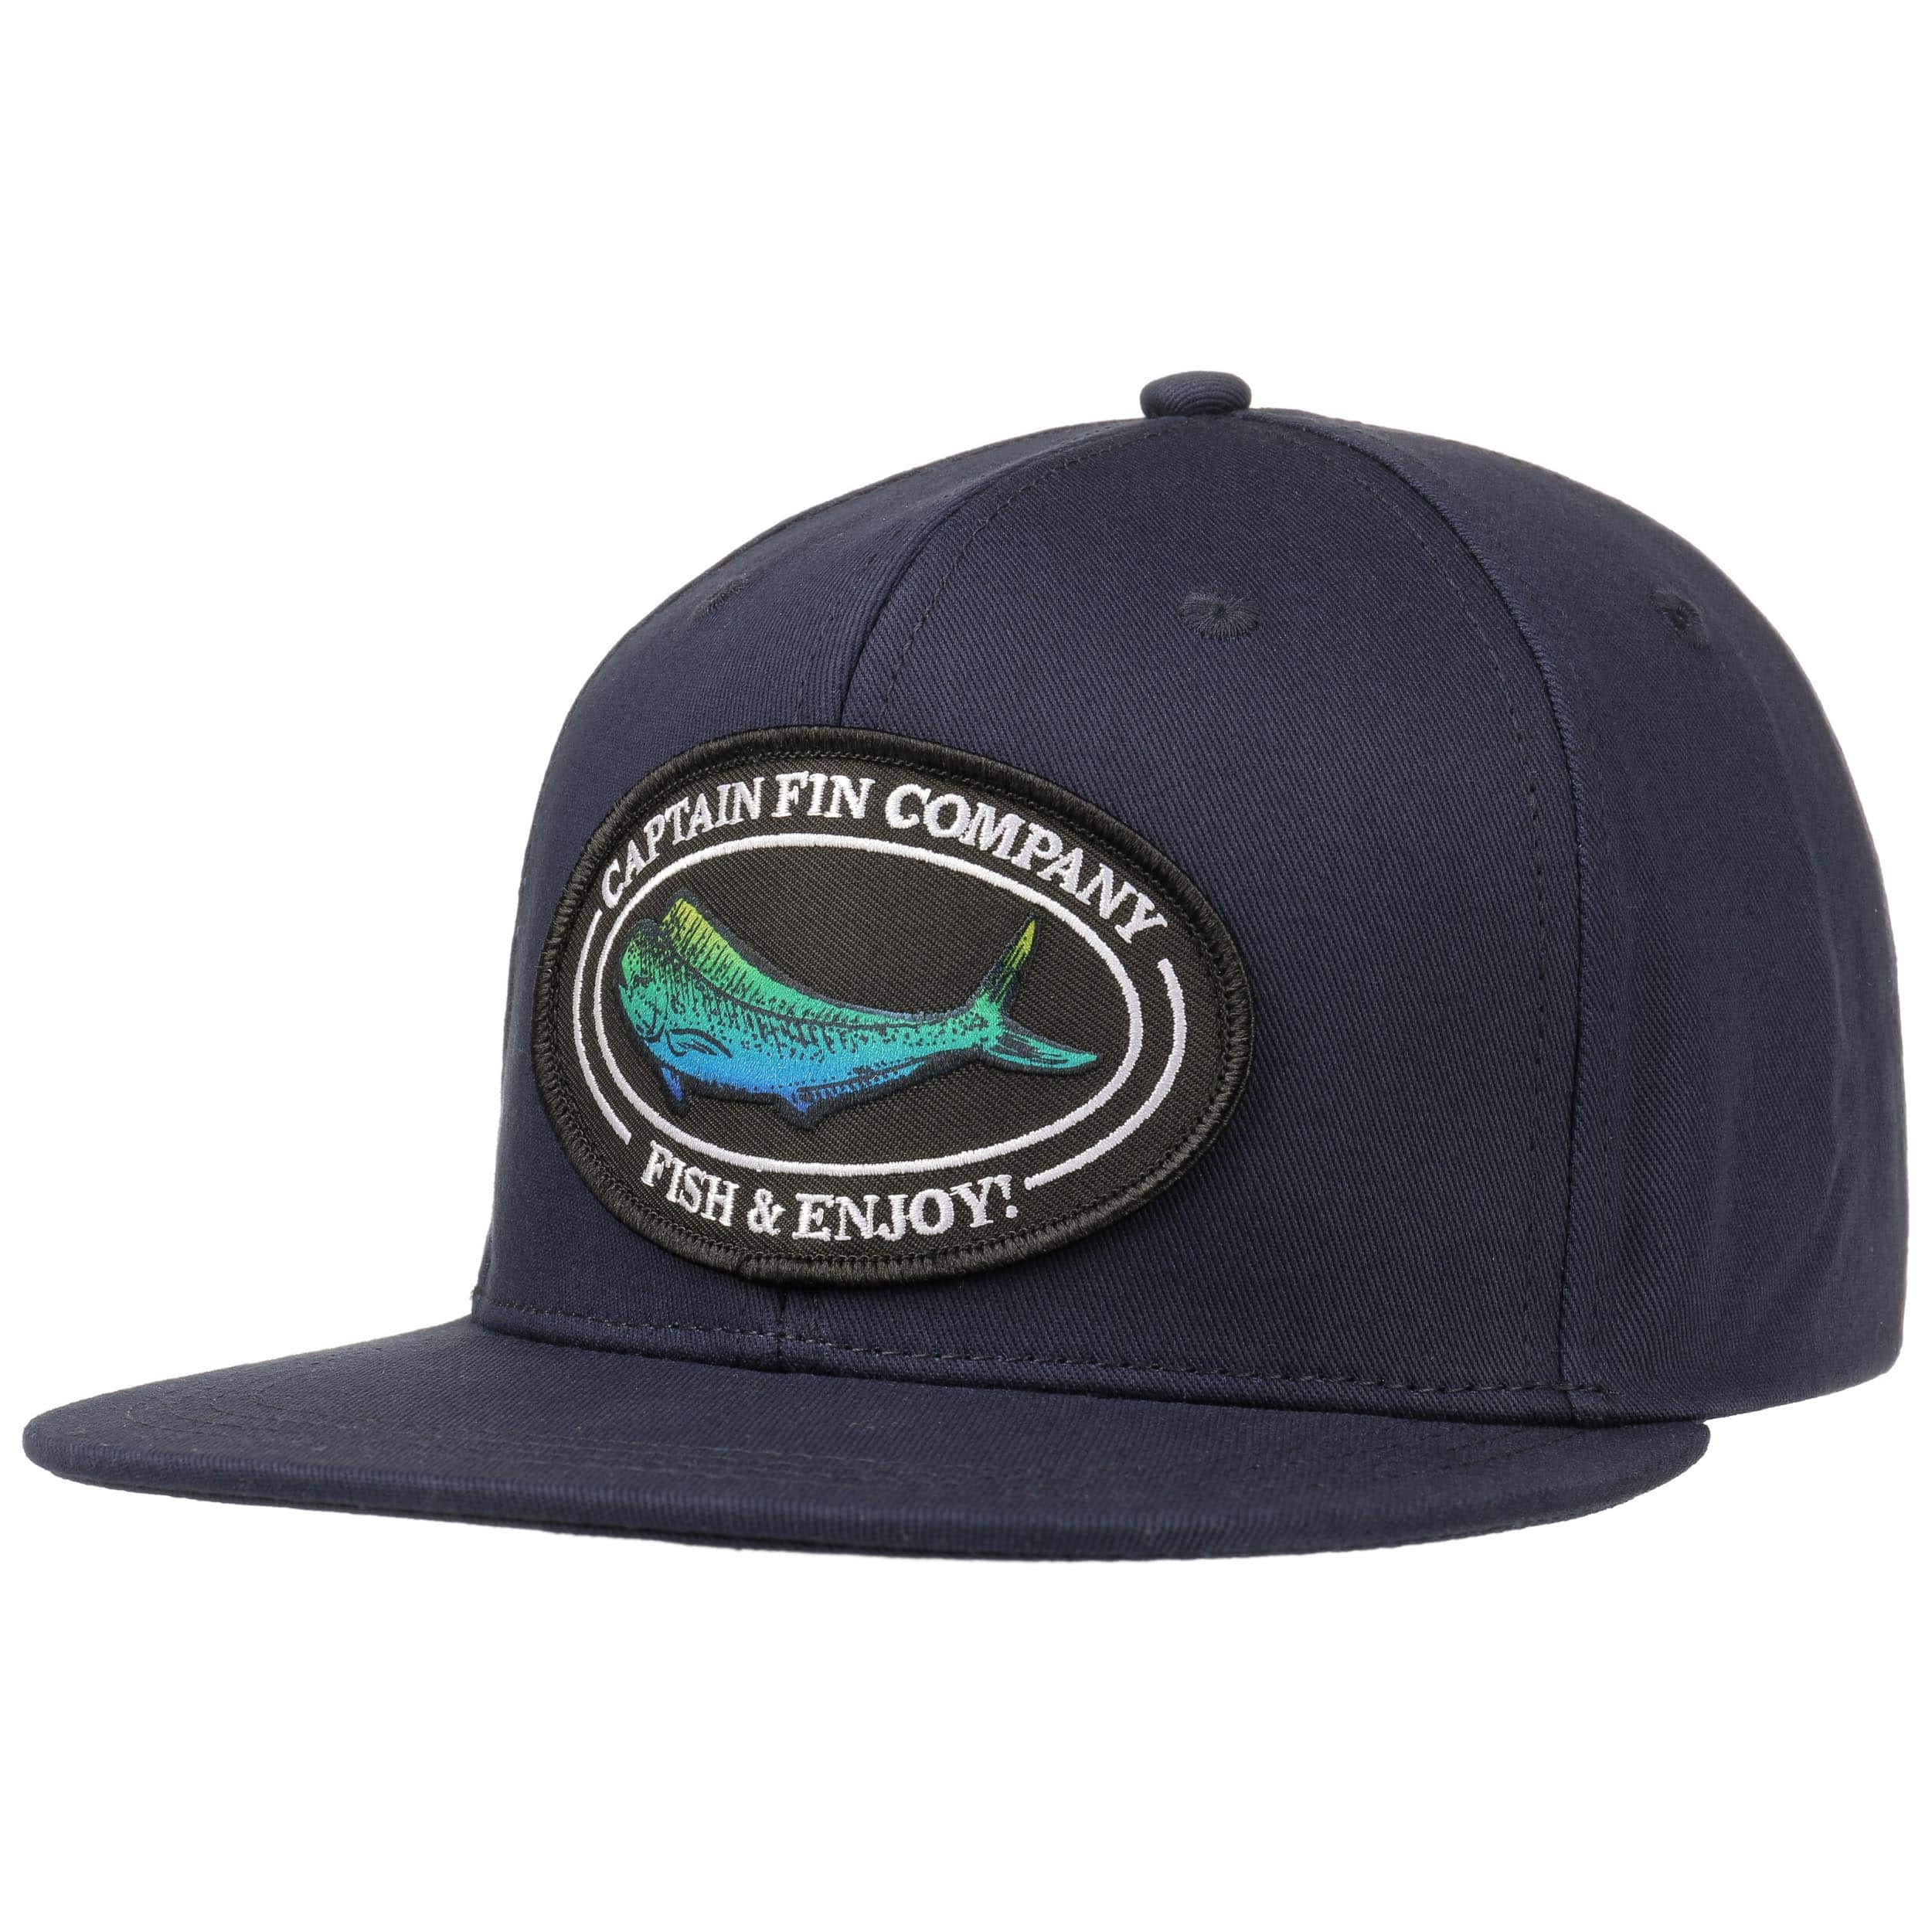 Dolphinfish Snapback Cap by Captain Fin - 22,95 €